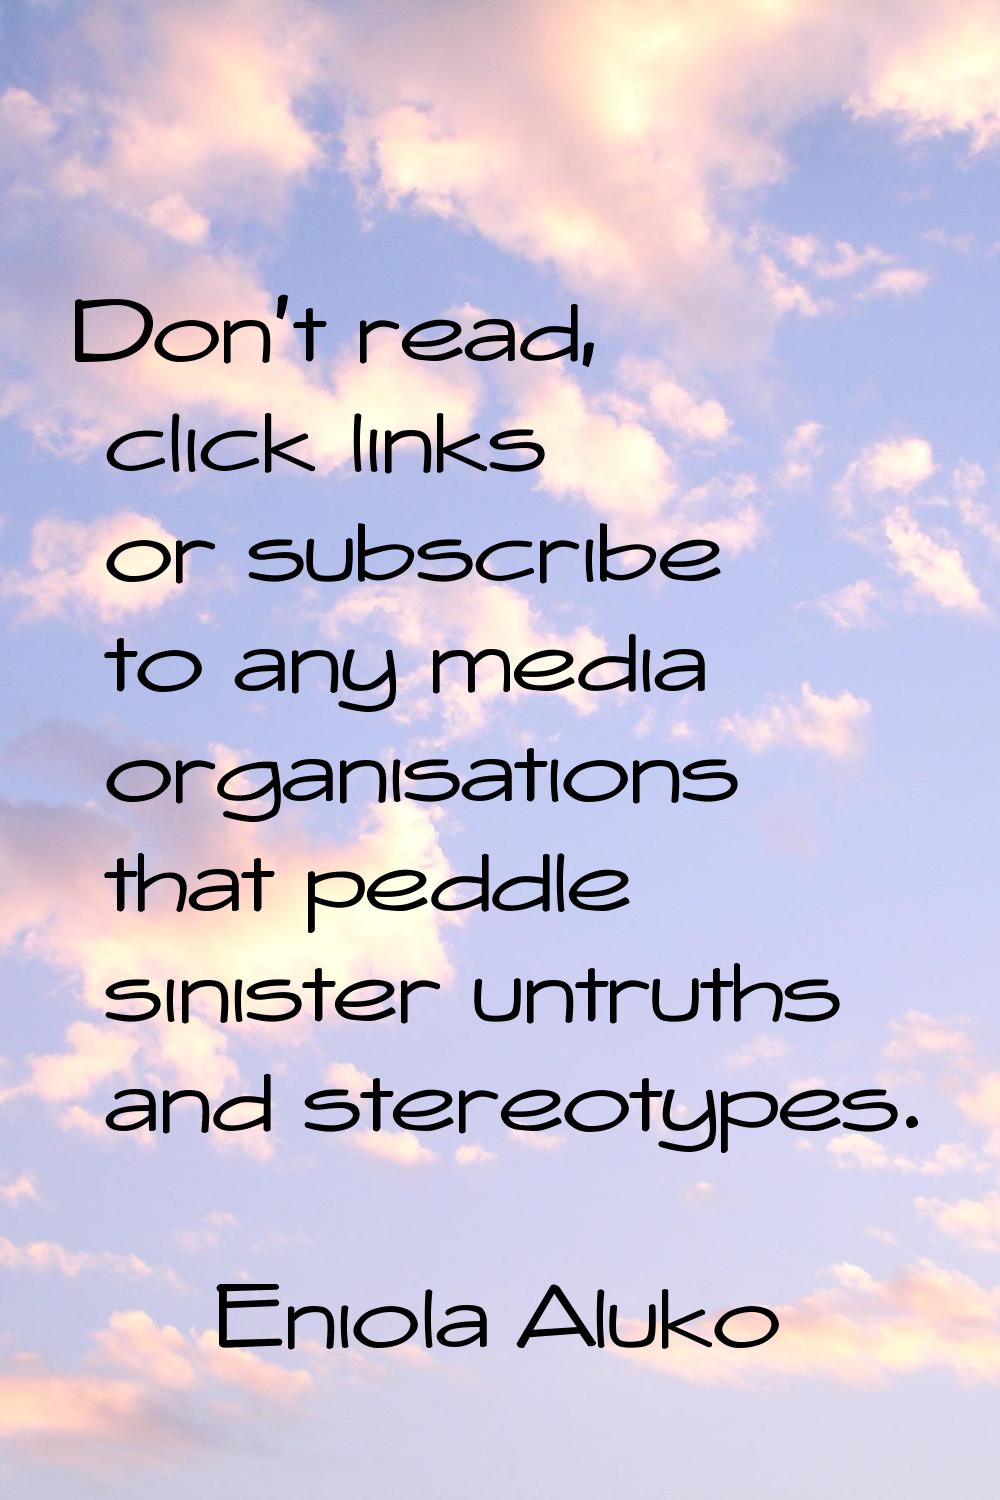 Don't read, click links or subscribe to any media organisations that peddle sinister untruths and s